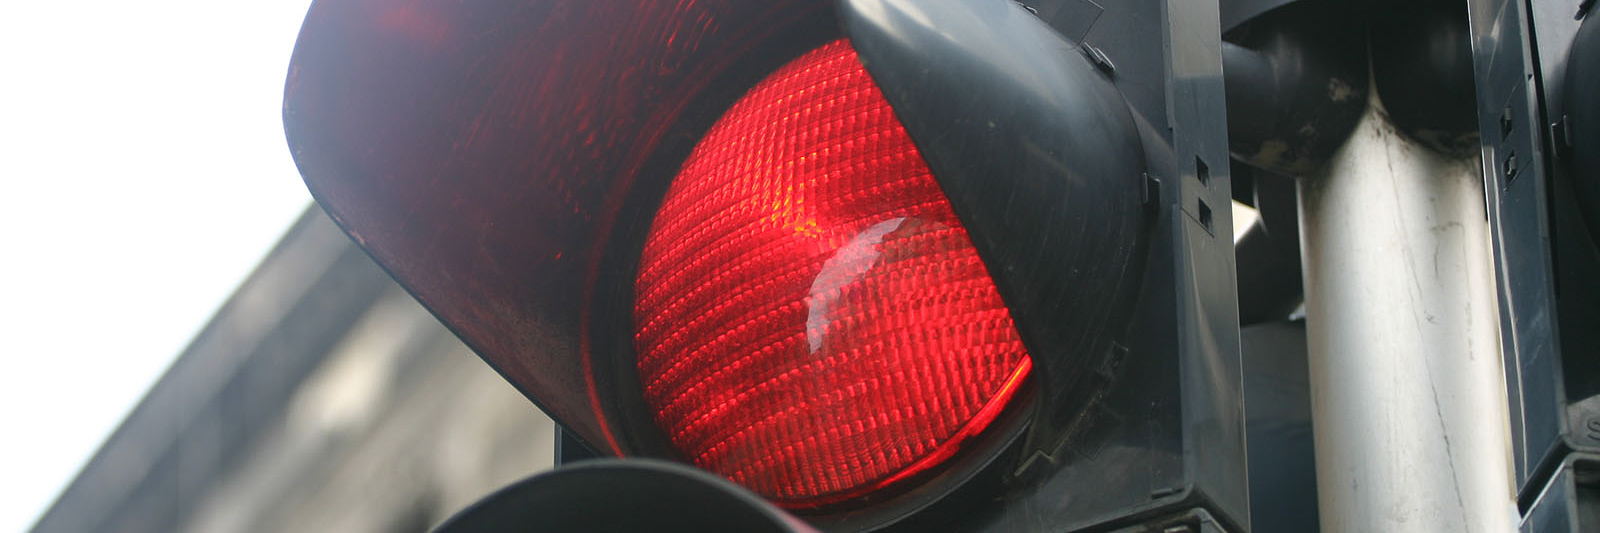 2022 Red Stopllight at intersection